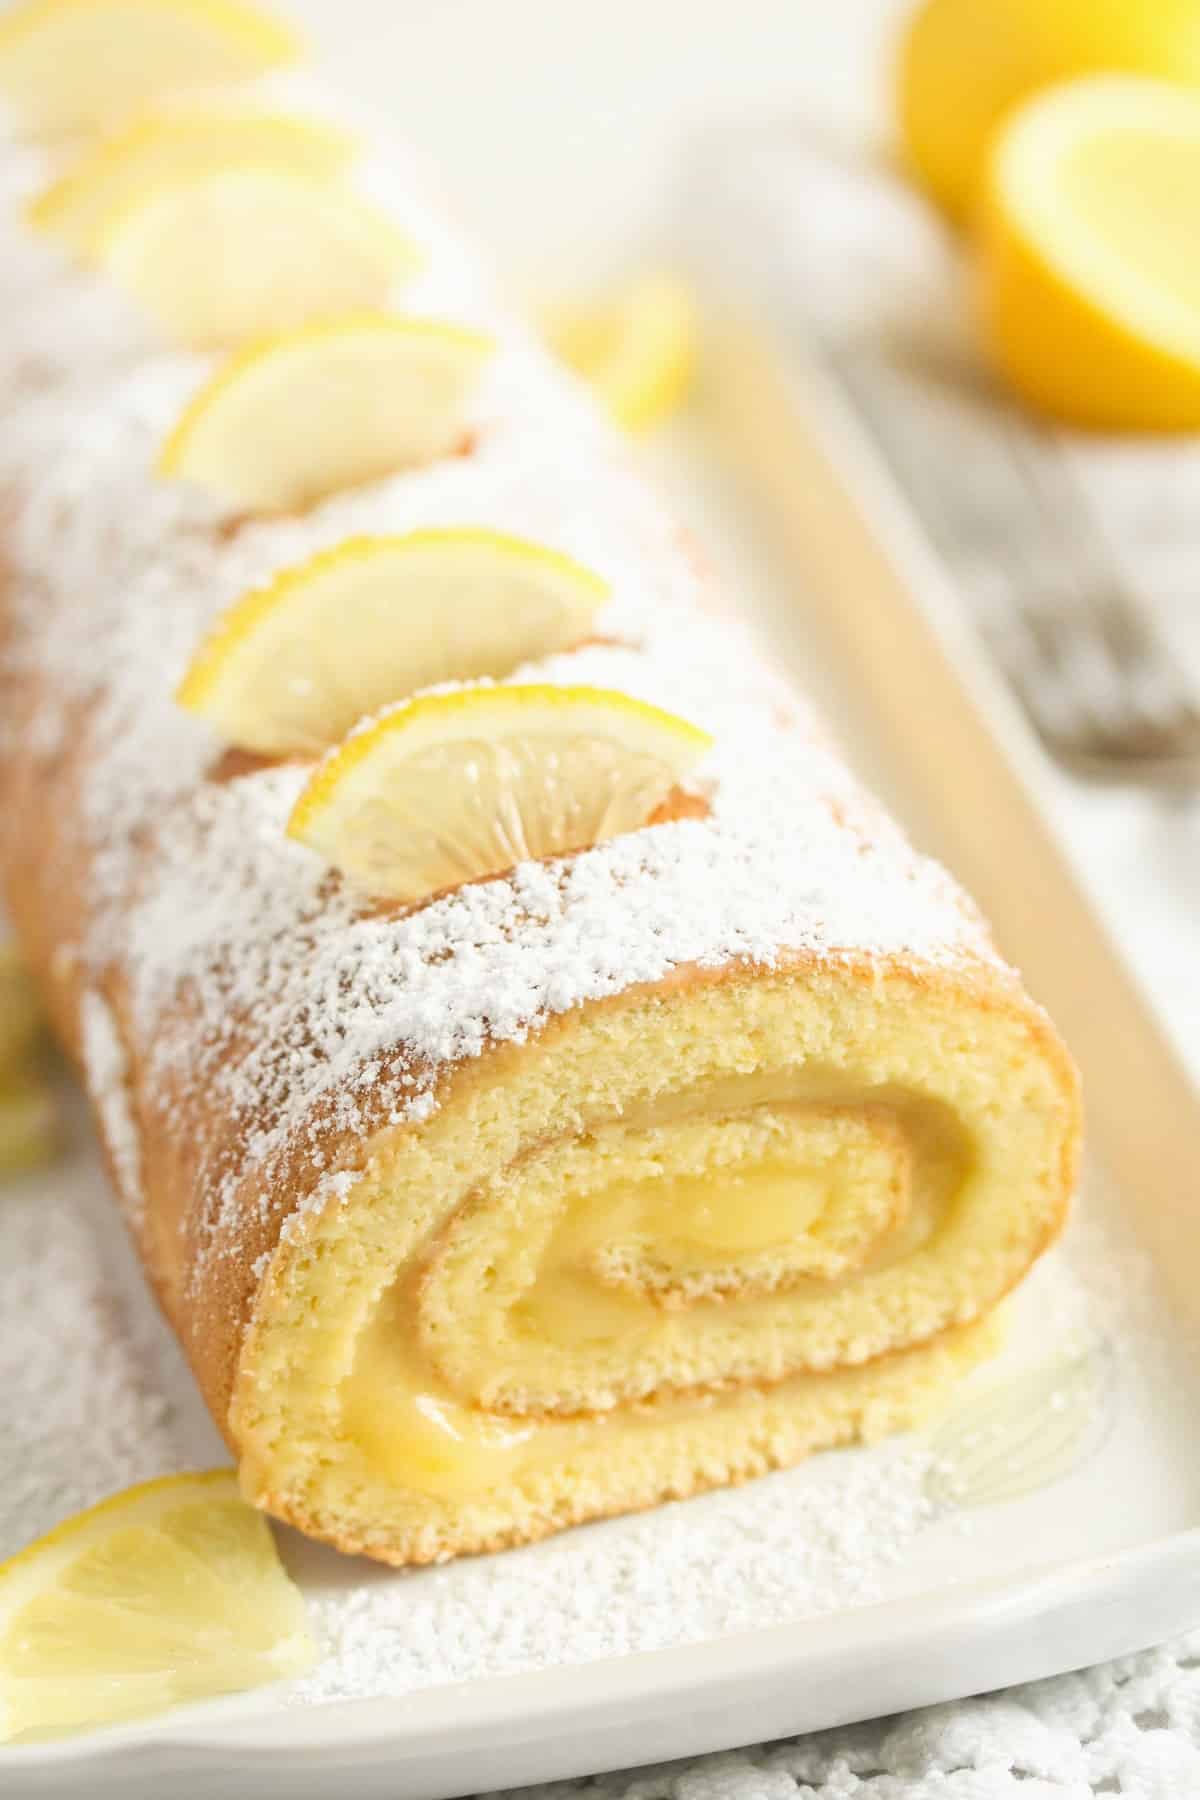 lemon cake roll sprinkled with icing sugar and topped with small lemon slices.